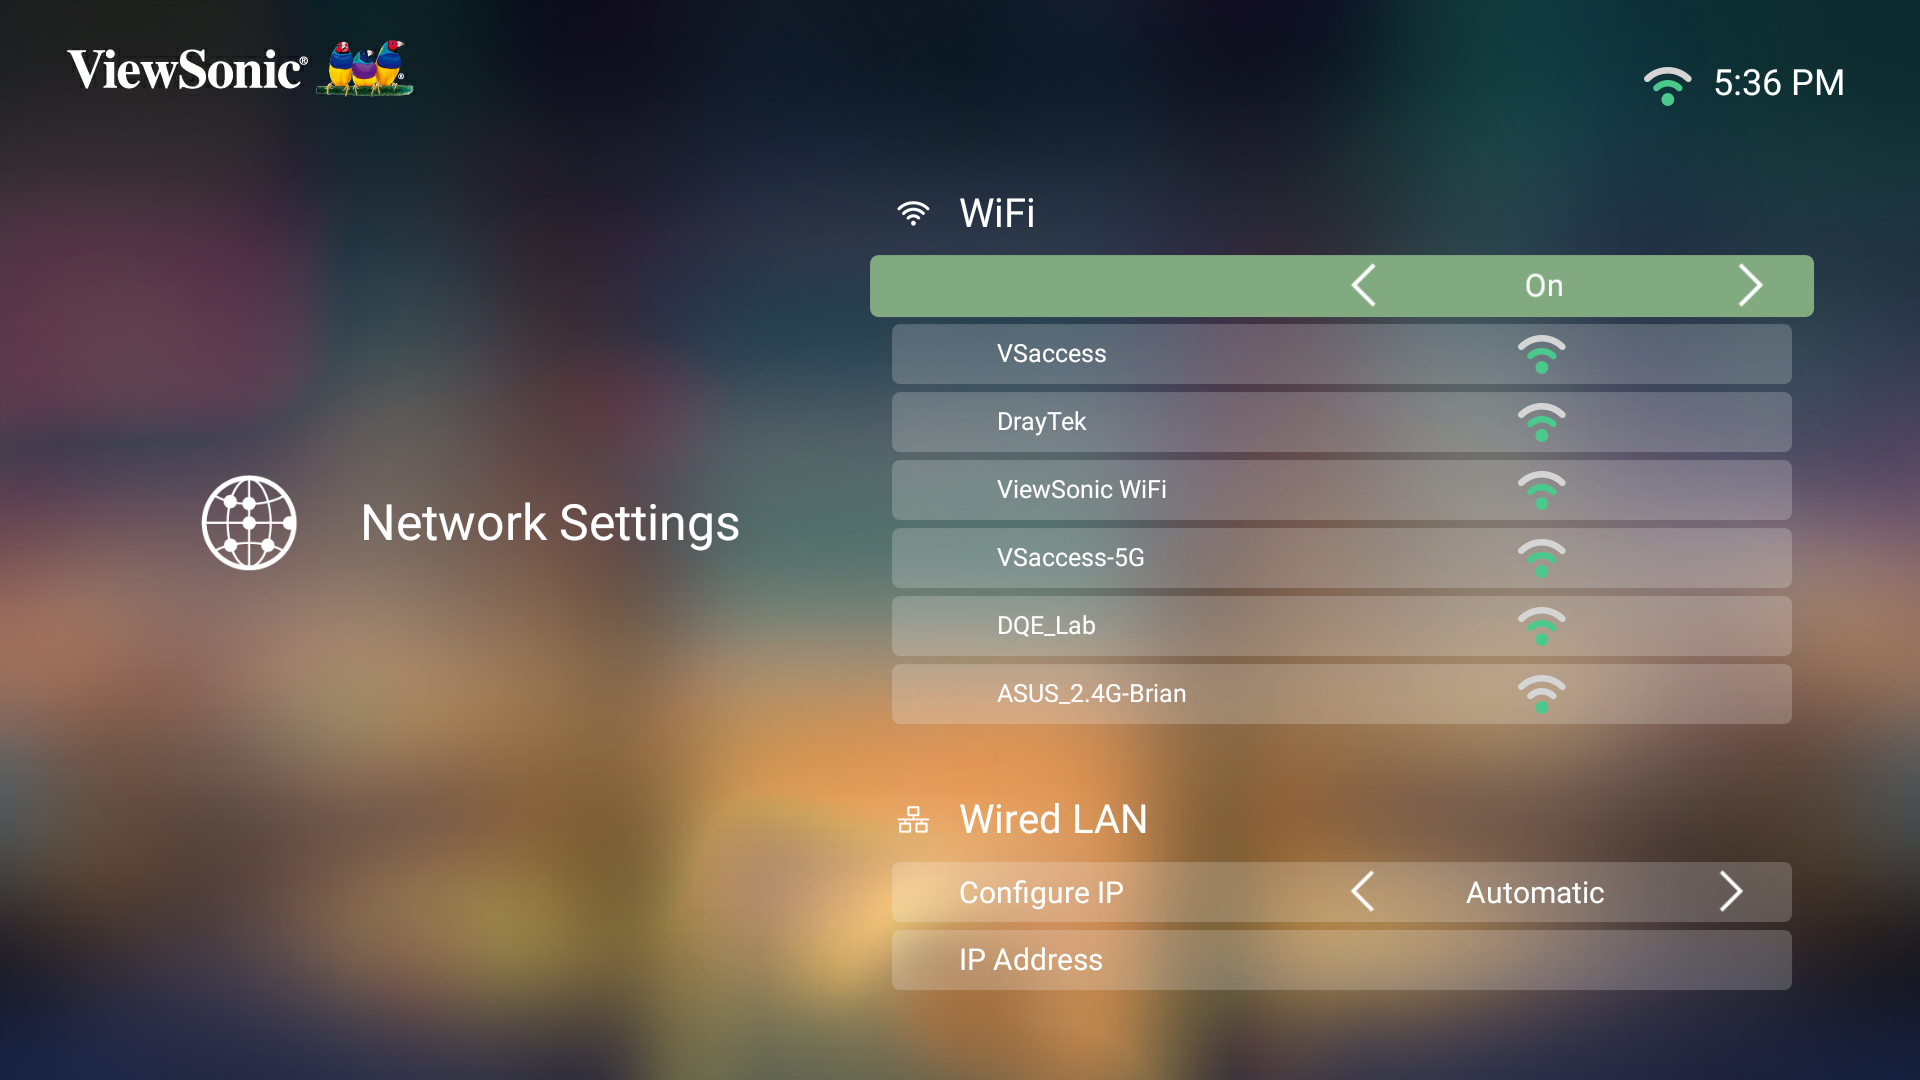 Step 4 - Select Network